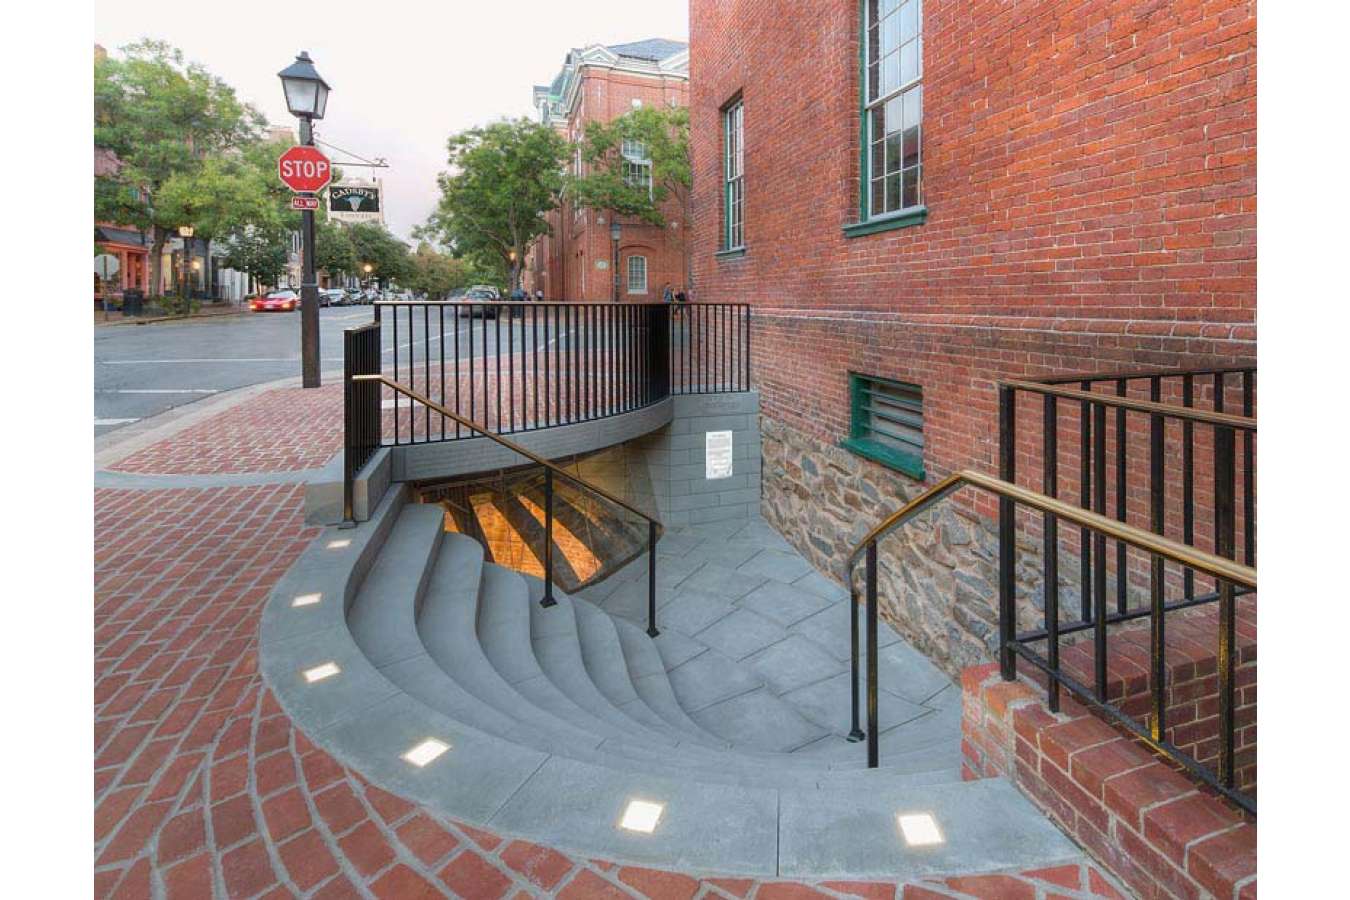 2a 1 HDP_130831_03_FS Bell Stairs : Street view of Gadsby's Tavern Ice Well after restoration and redesign